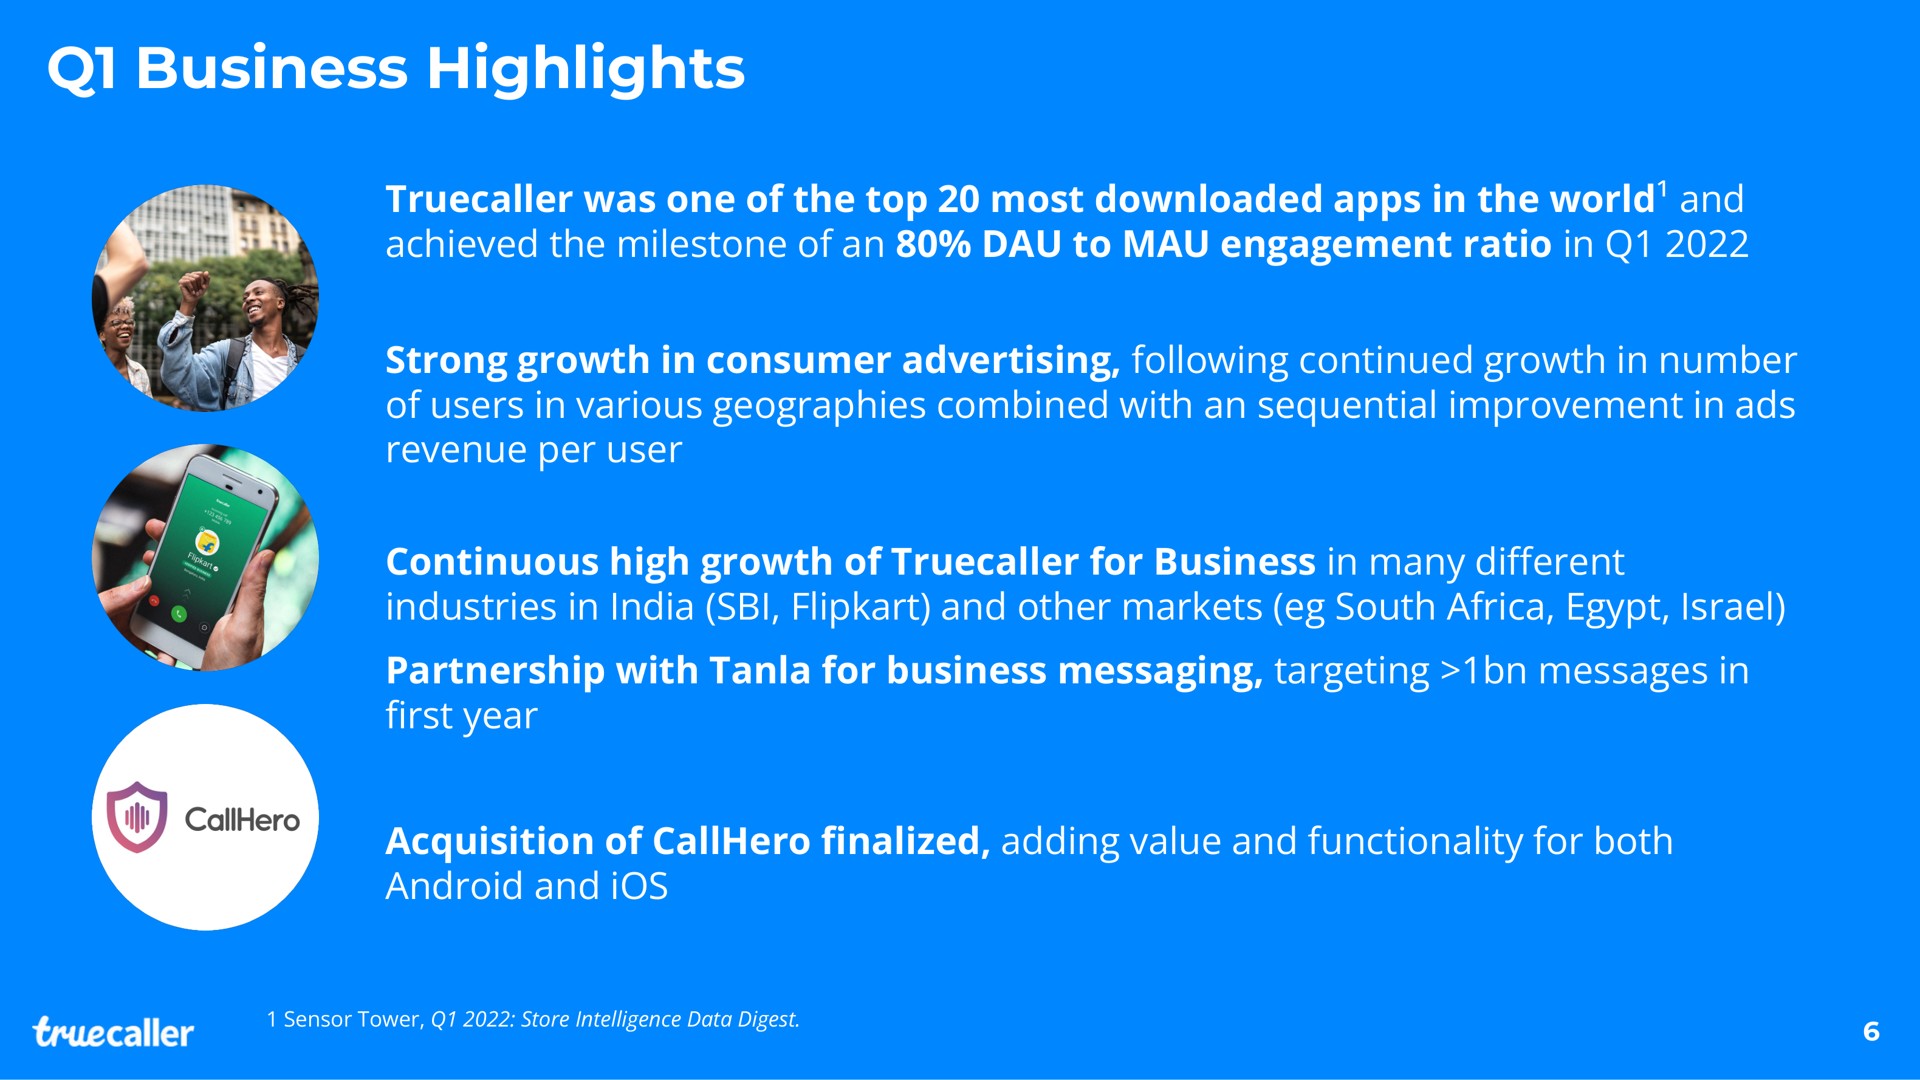 business highlights was one of the top most in the world and achieved the milestone of an to mau engagement ratio in strong growth in consumer advertising following continued growth in number of users in various geographies combined with an sequential improvement in ads revenue per user continuous high growth of for business in many industries in and other markets south partnership with for business messaging targeting messages in year acquisition of adding value and functionality for both android and ios different finalized a | Truecaller